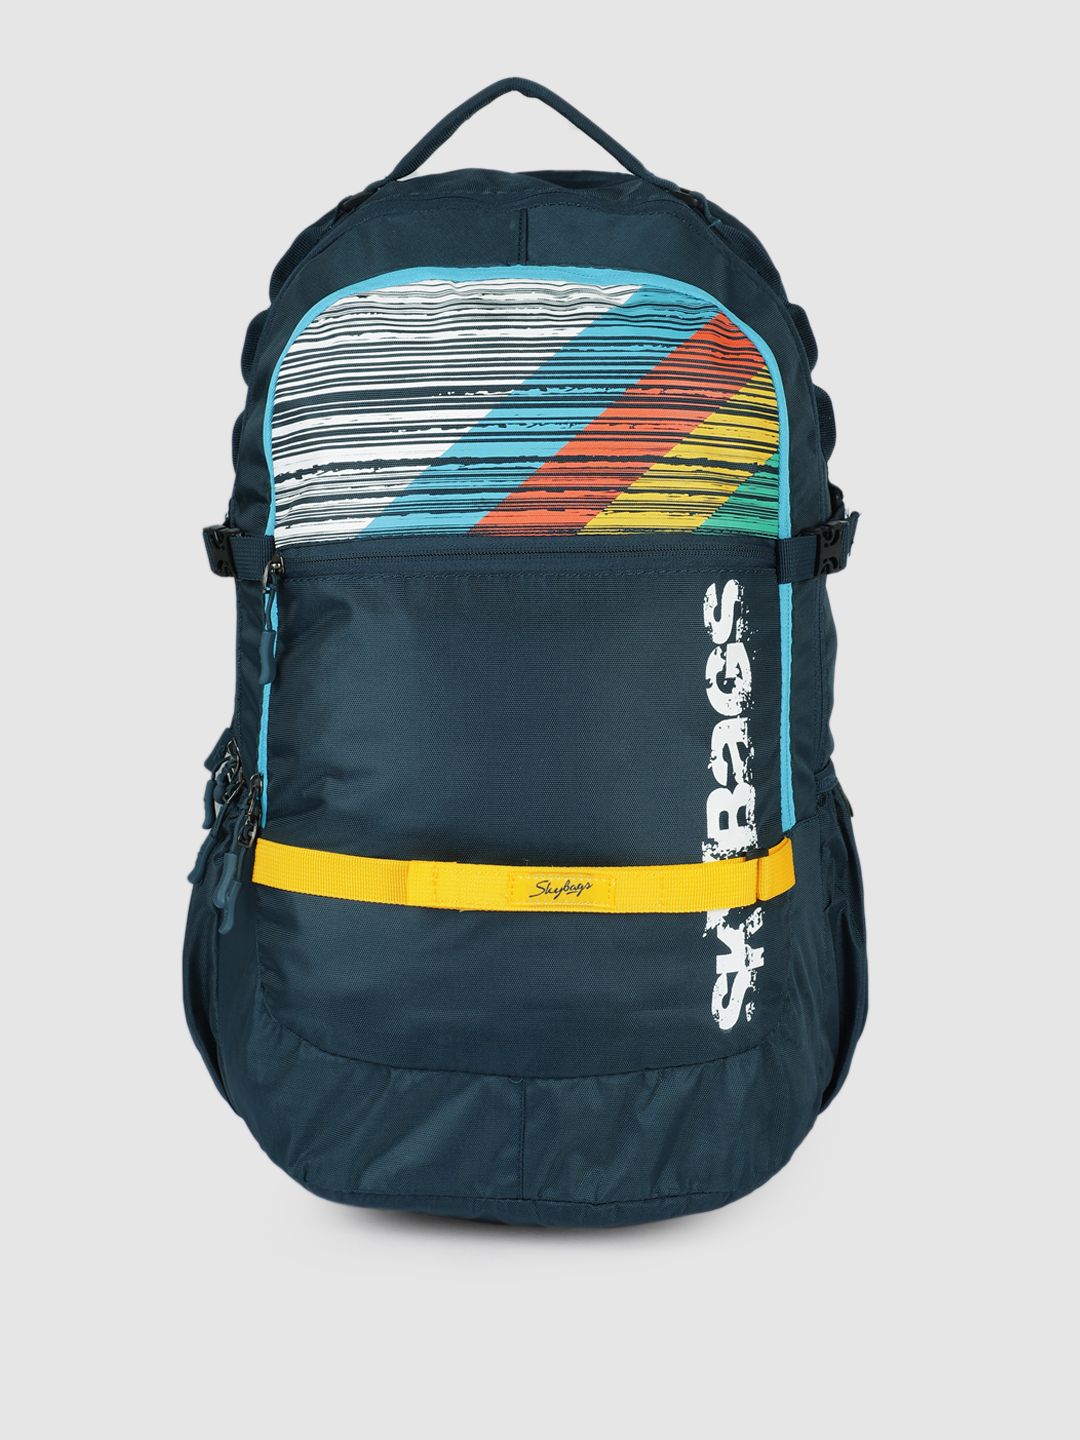 Skybags Unisex Teal Striped Backpack with Compression Straps Price in India